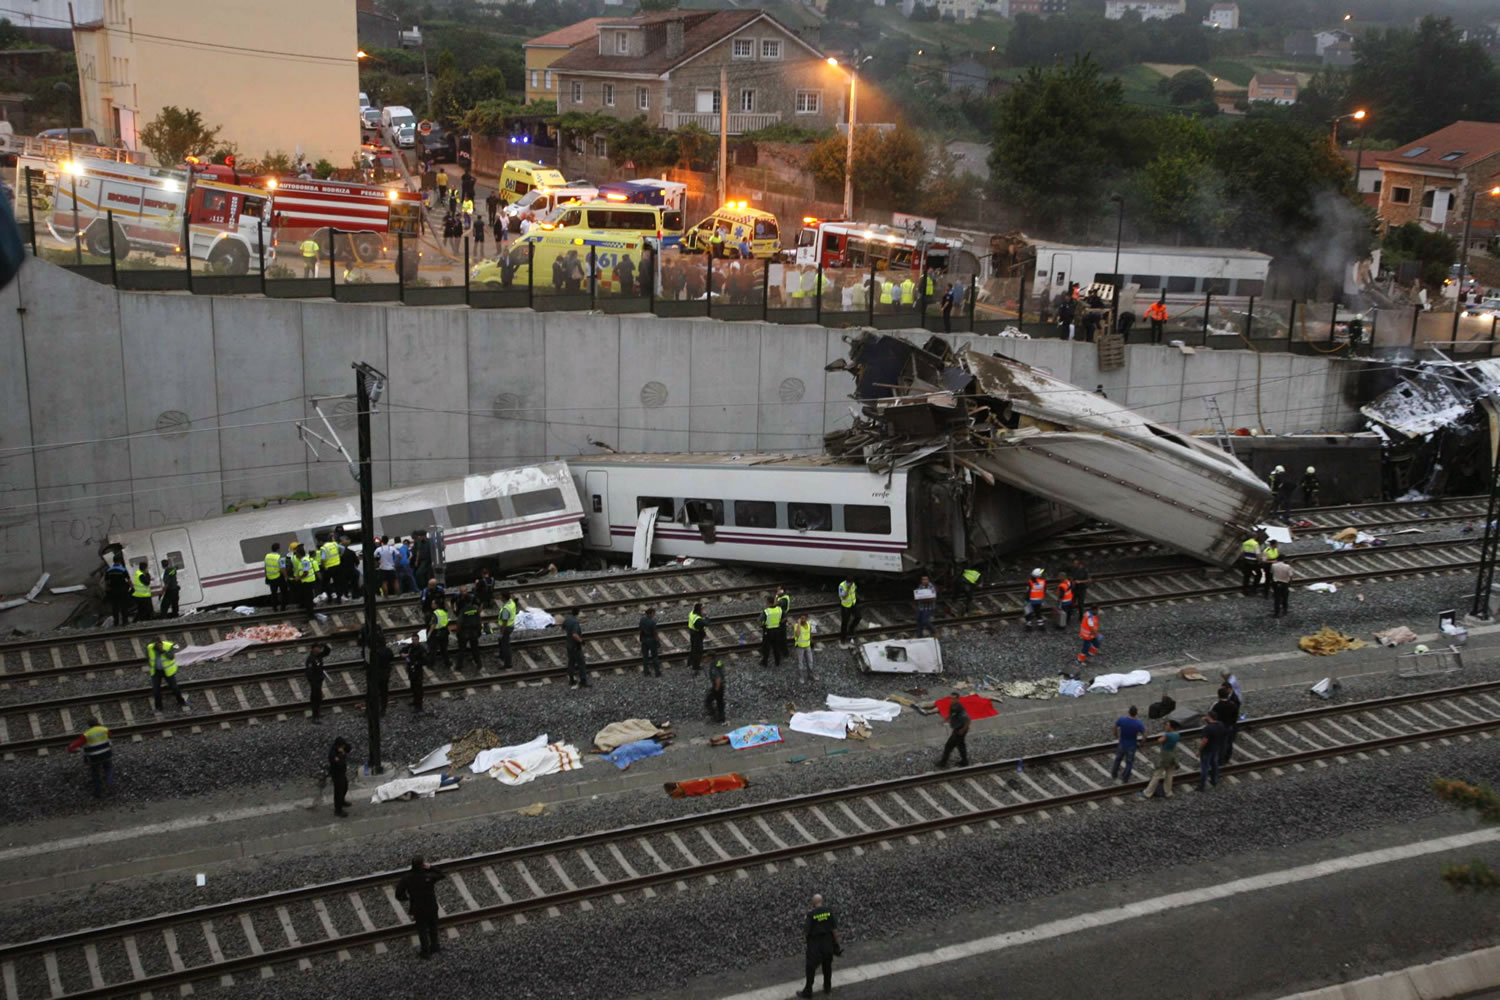 Emergency personnel respond to the scene of a train derailment in Santiago de Compostela, Spain, on Wednesday. A train derailed in northwestern Spain on Wednesday night, toppling passenger cars on their sides and leaving at least one torn open as smoke rose into the air.